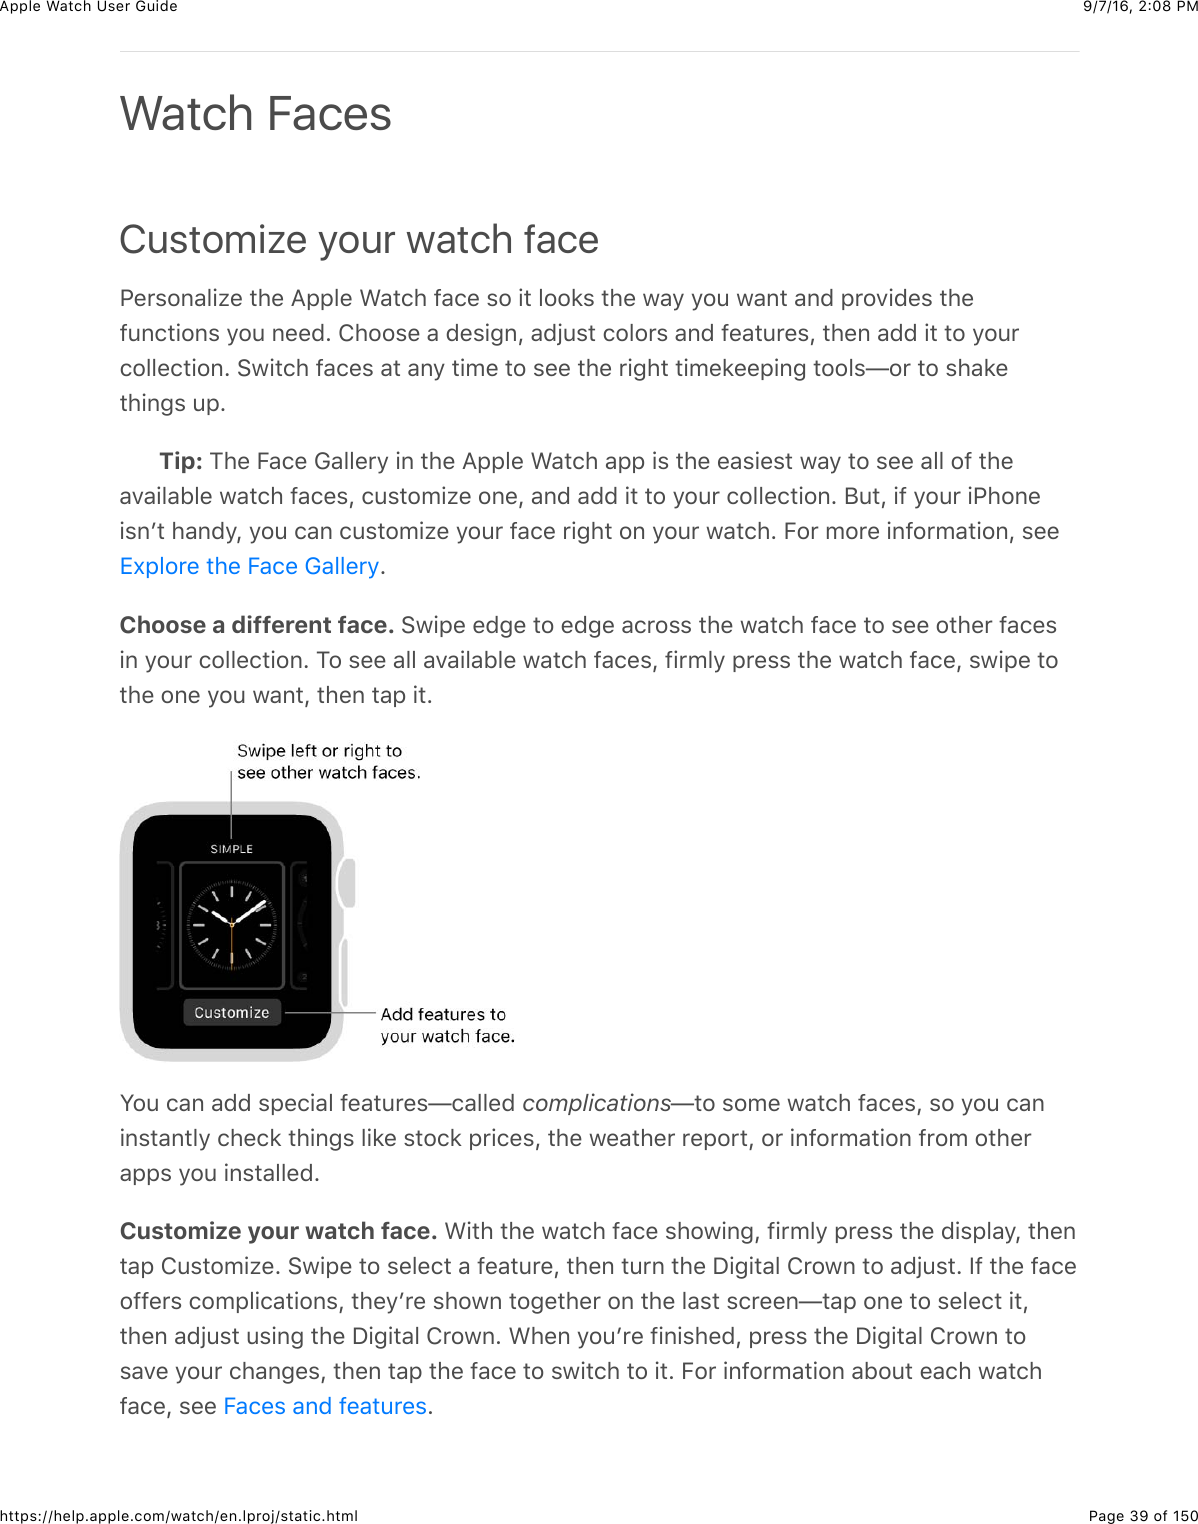 9/7/16, 2)08 PMApple Watch User GuidePage 39 of 150https://help.apple.com/watch/en.lproj/static.htmlCustomize your watch faceG%*$#,&apos;&quot;+N%&amp;3)%&amp;=22&quot;%&amp;&gt;&apos;3()&amp;@&apos;(%&amp;$#&amp;+3&amp;&quot;##8$&amp;3)%&amp;7&apos;/&amp;/#4&amp;7&apos;,3&amp;&apos;,0&amp;2*#.+0%$&amp;3)%@4,(3+#,$&amp;/#4&amp;,%%0C&amp;!)##$%&amp;&apos;&amp;0%$+-,J&amp;&apos;0O4$3&amp;(#&quot;#*$&amp;&apos;,0&amp;@%&apos;34*%$J&amp;3)%,&amp;&apos;00&amp;+3&amp;3#&amp;/#4*(#&quot;&quot;%(3+#,C&amp;67+3()&amp;@&apos;(%$&amp;&apos;3&amp;&apos;,/&amp;3+5%&amp;3#&amp;$%%&amp;3)%&amp;*+-)3&amp;3+5%8%%2+,-&amp;3##&quot;$T#*&amp;3#&amp;$)&apos;8%3)+,-$&amp;42CTip: 1)%&amp;E&apos;(%&amp;D&apos;&quot;&quot;%*/&amp;+,&amp;3)%&amp;=22&quot;%&amp;&gt;&apos;3()&amp;&apos;22&amp;+$&amp;3)%&amp;%&apos;$+%$3&amp;7&apos;/&amp;3#&amp;$%%&amp;&apos;&quot;&quot;&amp;#@&amp;3)%&apos;.&apos;+&quot;&apos;B&quot;%&amp;7&apos;3()&amp;@&apos;(%$J&amp;(4$3#5+N%&amp;#,%J&amp;&apos;,0&amp;&apos;00&amp;+3&amp;3#&amp;/#4*&amp;(#&quot;&quot;%(3+#,C&amp;;43J&amp;+@&amp;/#4*&amp;+G)#,%+$,W3&amp;)&apos;,0/J&amp;/#4&amp;(&apos;,&amp;(4$3#5+N%&amp;/#4*&amp;@&apos;(%&amp;*+-)3&amp;#,&amp;/#4*&amp;7&apos;3()C&amp;E#*&amp;5#*%&amp;+,@#*5&apos;3+#,J&amp;$%%CChoose a different face. 67+2%&amp;%0-%&amp;3#&amp;%0-%&amp;&apos;(*#$$&amp;3)%&amp;7&apos;3()&amp;@&apos;(%&amp;3#&amp;$%%&amp;#3)%*&amp;@&apos;(%$+,&amp;/#4*&amp;(#&quot;&quot;%(3+#,C&amp;1#&amp;$%%&amp;&apos;&quot;&quot;&amp;&apos;.&apos;+&quot;&apos;B&quot;%&amp;7&apos;3()&amp;@&apos;(%$J&amp;@+*5&quot;/&amp;2*%$$&amp;3)%&amp;7&apos;3()&amp;@&apos;(%J&amp;$7+2%&amp;3#3)%&amp;#,%&amp;/#4&amp;7&apos;,3J&amp;3)%,&amp;3&apos;2&amp;+3CS#4&amp;(&apos;,&amp;&apos;00&amp;$2%(+&apos;&quot;&amp;@%&apos;34*%$T(&apos;&quot;&quot;%0&amp;complicationsT3#&amp;$#5%&amp;7&apos;3()&amp;@&apos;(%$J&amp;$#&amp;/#4&amp;(&apos;,+,$3&apos;,3&quot;/&amp;()%(8&amp;3)+,-$&amp;&quot;+8%&amp;$3#(8&amp;2*+(%$J&amp;3)%&amp;7%&apos;3)%*&amp;*%2#*3J&amp;#*&amp;+,@#*5&apos;3+#,&amp;@*#5&amp;#3)%*&apos;22$&amp;/#4&amp;+,$3&apos;&quot;&quot;%0CCustomize your watch face. &gt;+3)&amp;3)%&amp;7&apos;3()&amp;@&apos;(%&amp;$)#7+,-J&amp;@+*5&quot;/&amp;2*%$$&amp;3)%&amp;0+$2&quot;&apos;/J&amp;3)%,3&apos;2&amp;!4$3#5+N%C&amp;67+2%&amp;3#&amp;$%&quot;%(3&amp;&apos;&amp;@%&apos;34*%J&amp;3)%,&amp;34*,&amp;3)%&amp;I+-+3&apos;&quot;&amp;!*#7,&amp;3#&amp;&apos;0O4$3C&amp;Y@&amp;3)%&amp;@&apos;(%#@@%*$&amp;(#52&quot;+(&apos;3+#,$J&amp;3)%/W*%&amp;$)#7,&amp;3#-%3)%*&amp;#,&amp;3)%&amp;&quot;&apos;$3&amp;$(*%%,T3&apos;2&amp;#,%&amp;3#&amp;$%&quot;%(3&amp;+3J3)%,&amp;&apos;0O4$3&amp;4$+,-&amp;3)%&amp;I+-+3&apos;&quot;&amp;!*#7,C&amp;&gt;)%,&amp;/#4W*%&amp;@+,+$)%0J&amp;2*%$$&amp;3)%&amp;I+-+3&apos;&quot;&amp;!*#7,&amp;3#$&apos;.%&amp;/#4*&amp;()&apos;,-%$J&amp;3)%,&amp;3&apos;2&amp;3)%&amp;@&apos;(%&amp;3#&amp;$7+3()&amp;3#&amp;+3C&amp;E#*&amp;+,@#*5&apos;3+#,&amp;&apos;B#43&amp;%&apos;()&amp;7&apos;3()@&apos;(%J&amp;$%%&amp; CWatch FacesZU2&quot;#*%&amp;3)%&amp;E&apos;(%&amp;D&apos;&quot;&quot;%*/E&apos;(%$&amp;&apos;,0&amp;@%&apos;34*%$